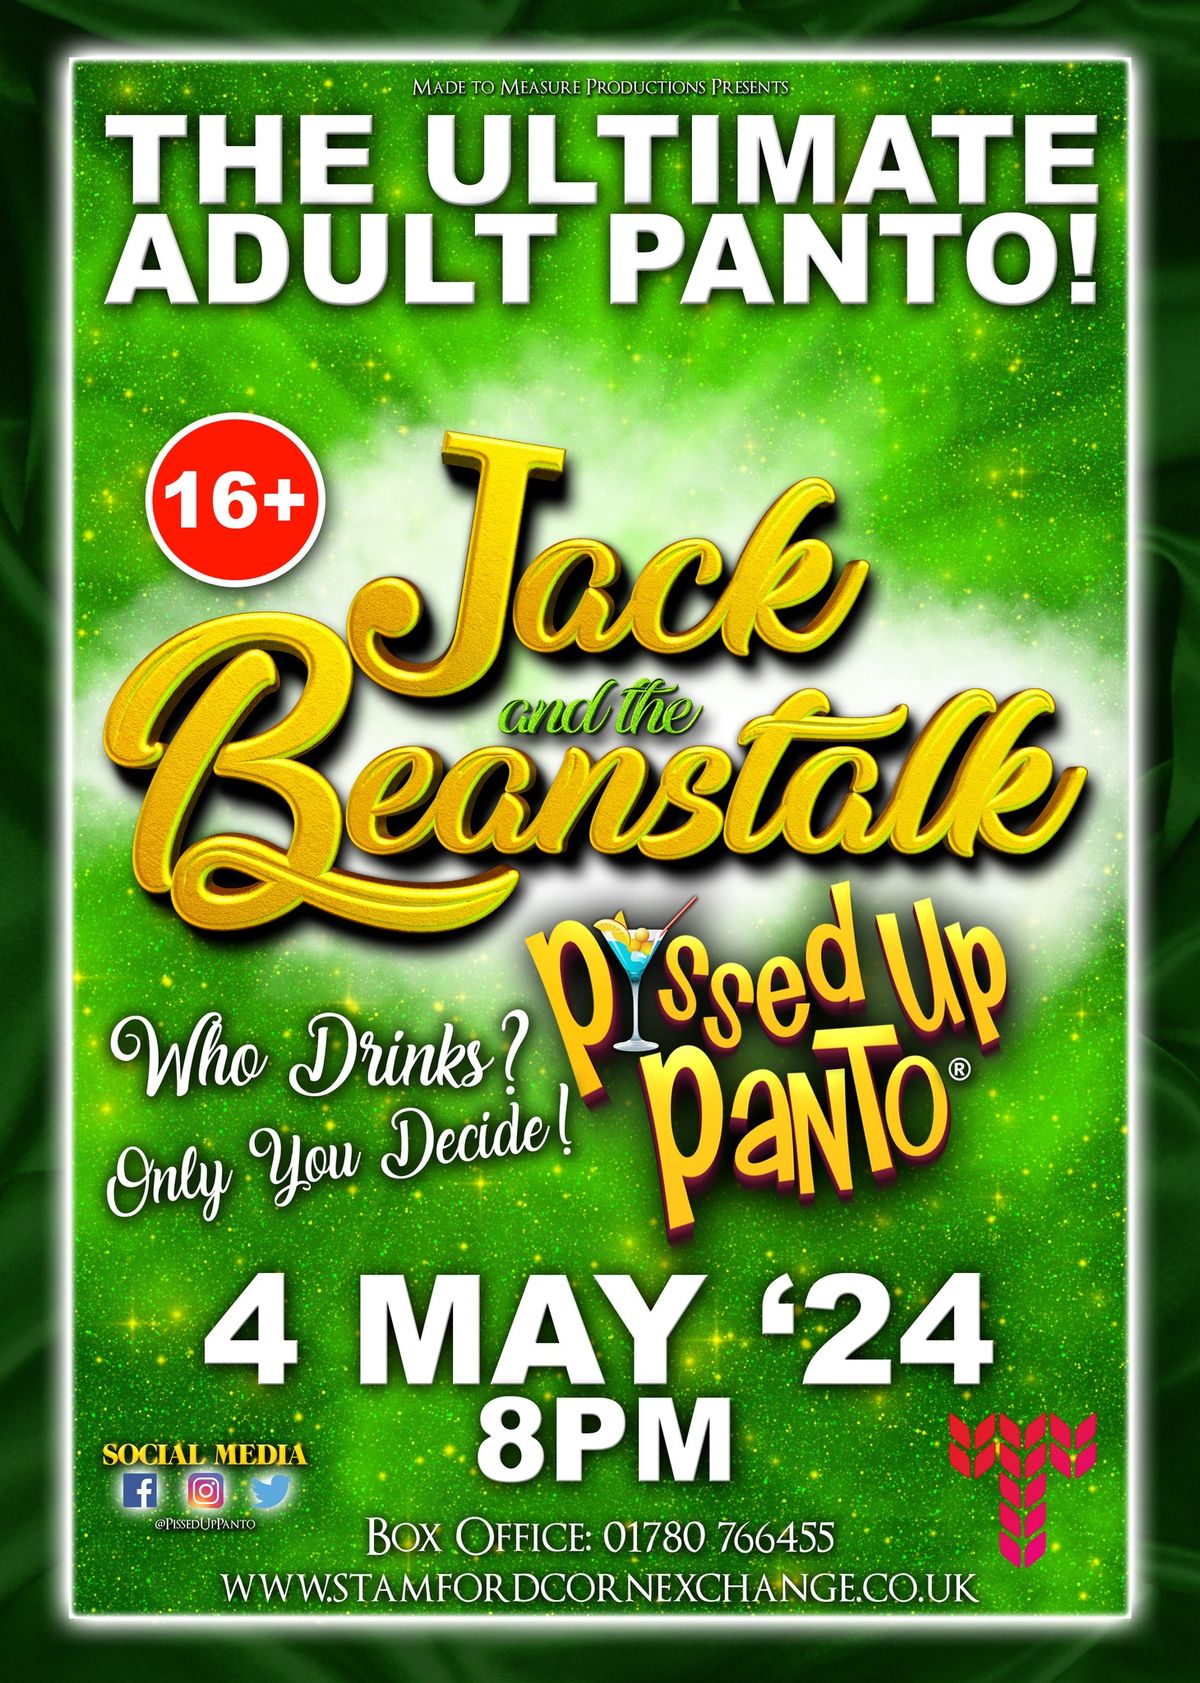 P*ssed up Panto: Jack and the Beanstalk